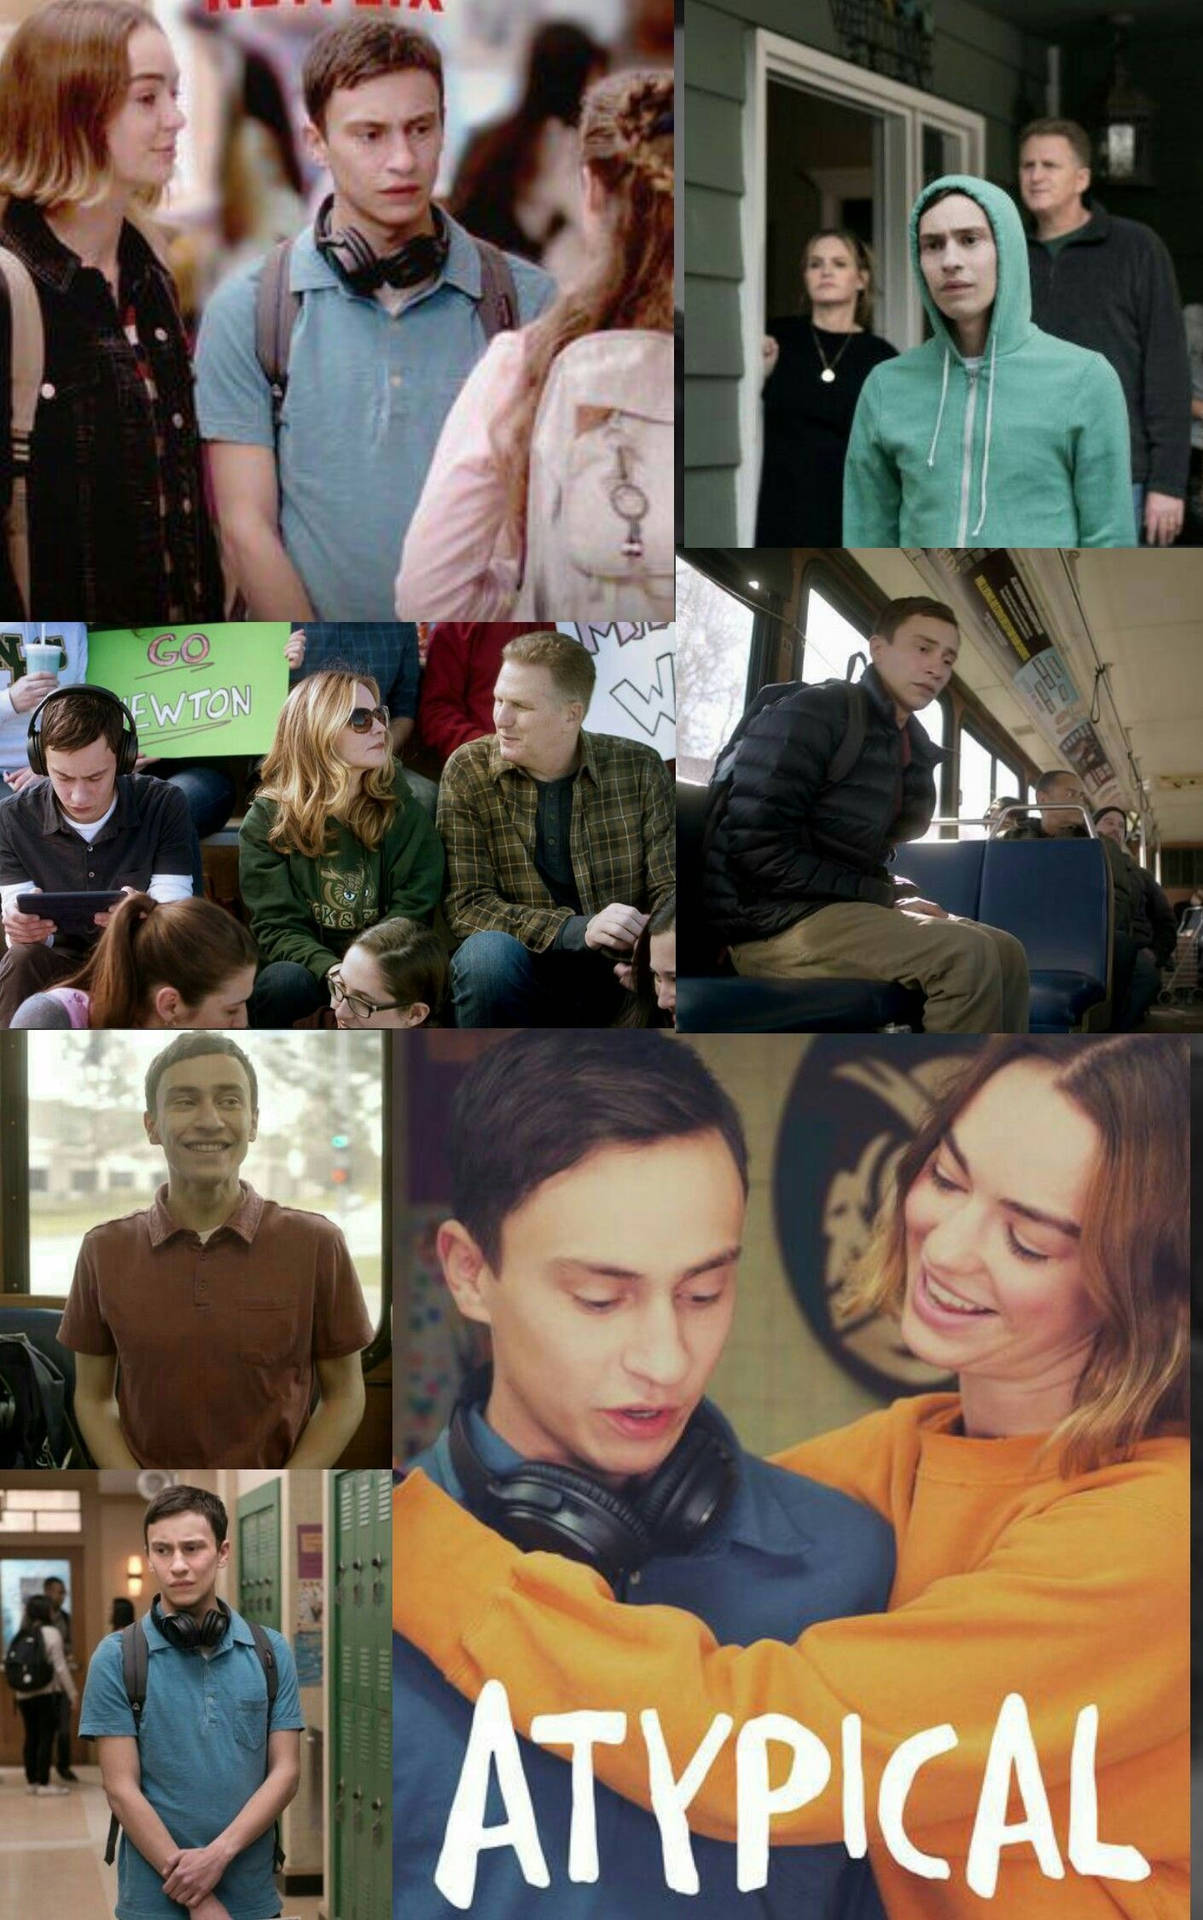 Atypical Comedy-Drama Television Series Wallpaper